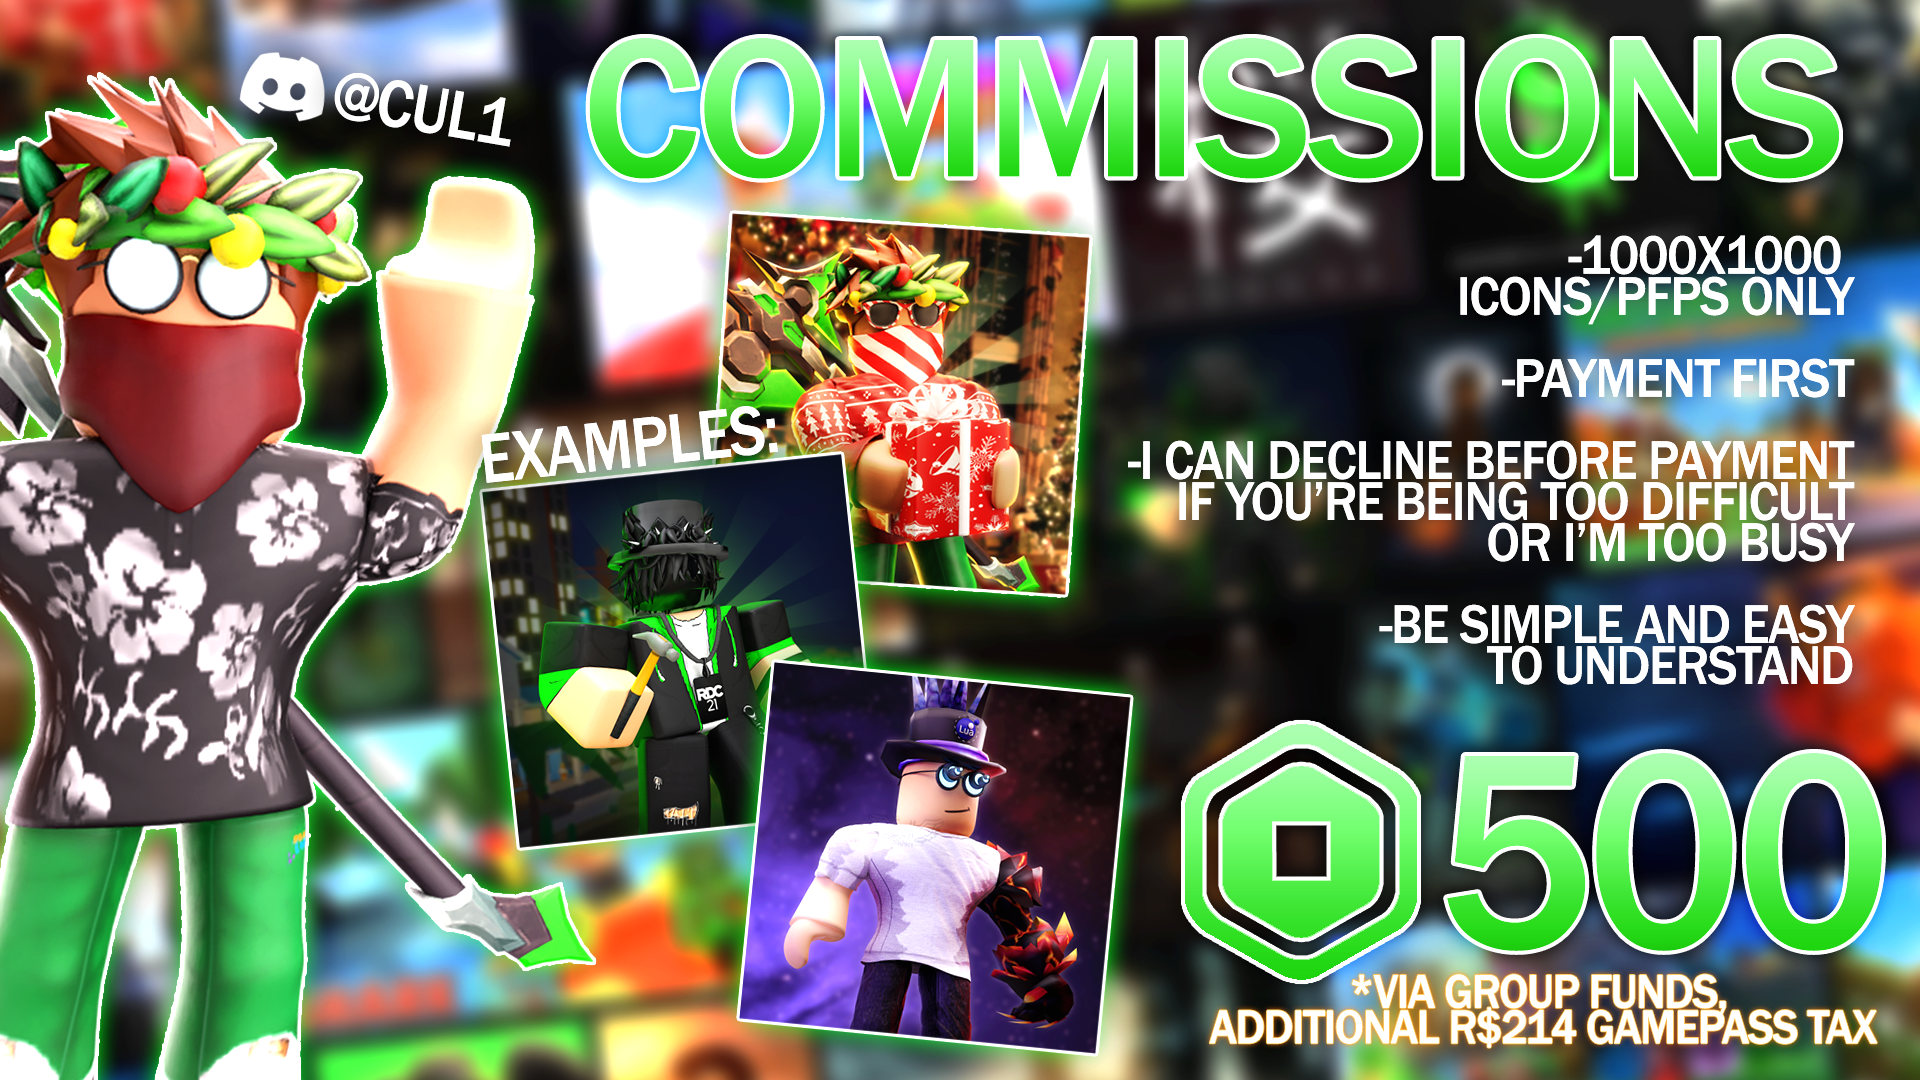 Comissions Price List !! (Robux) by Christianweslen on DeviantArt